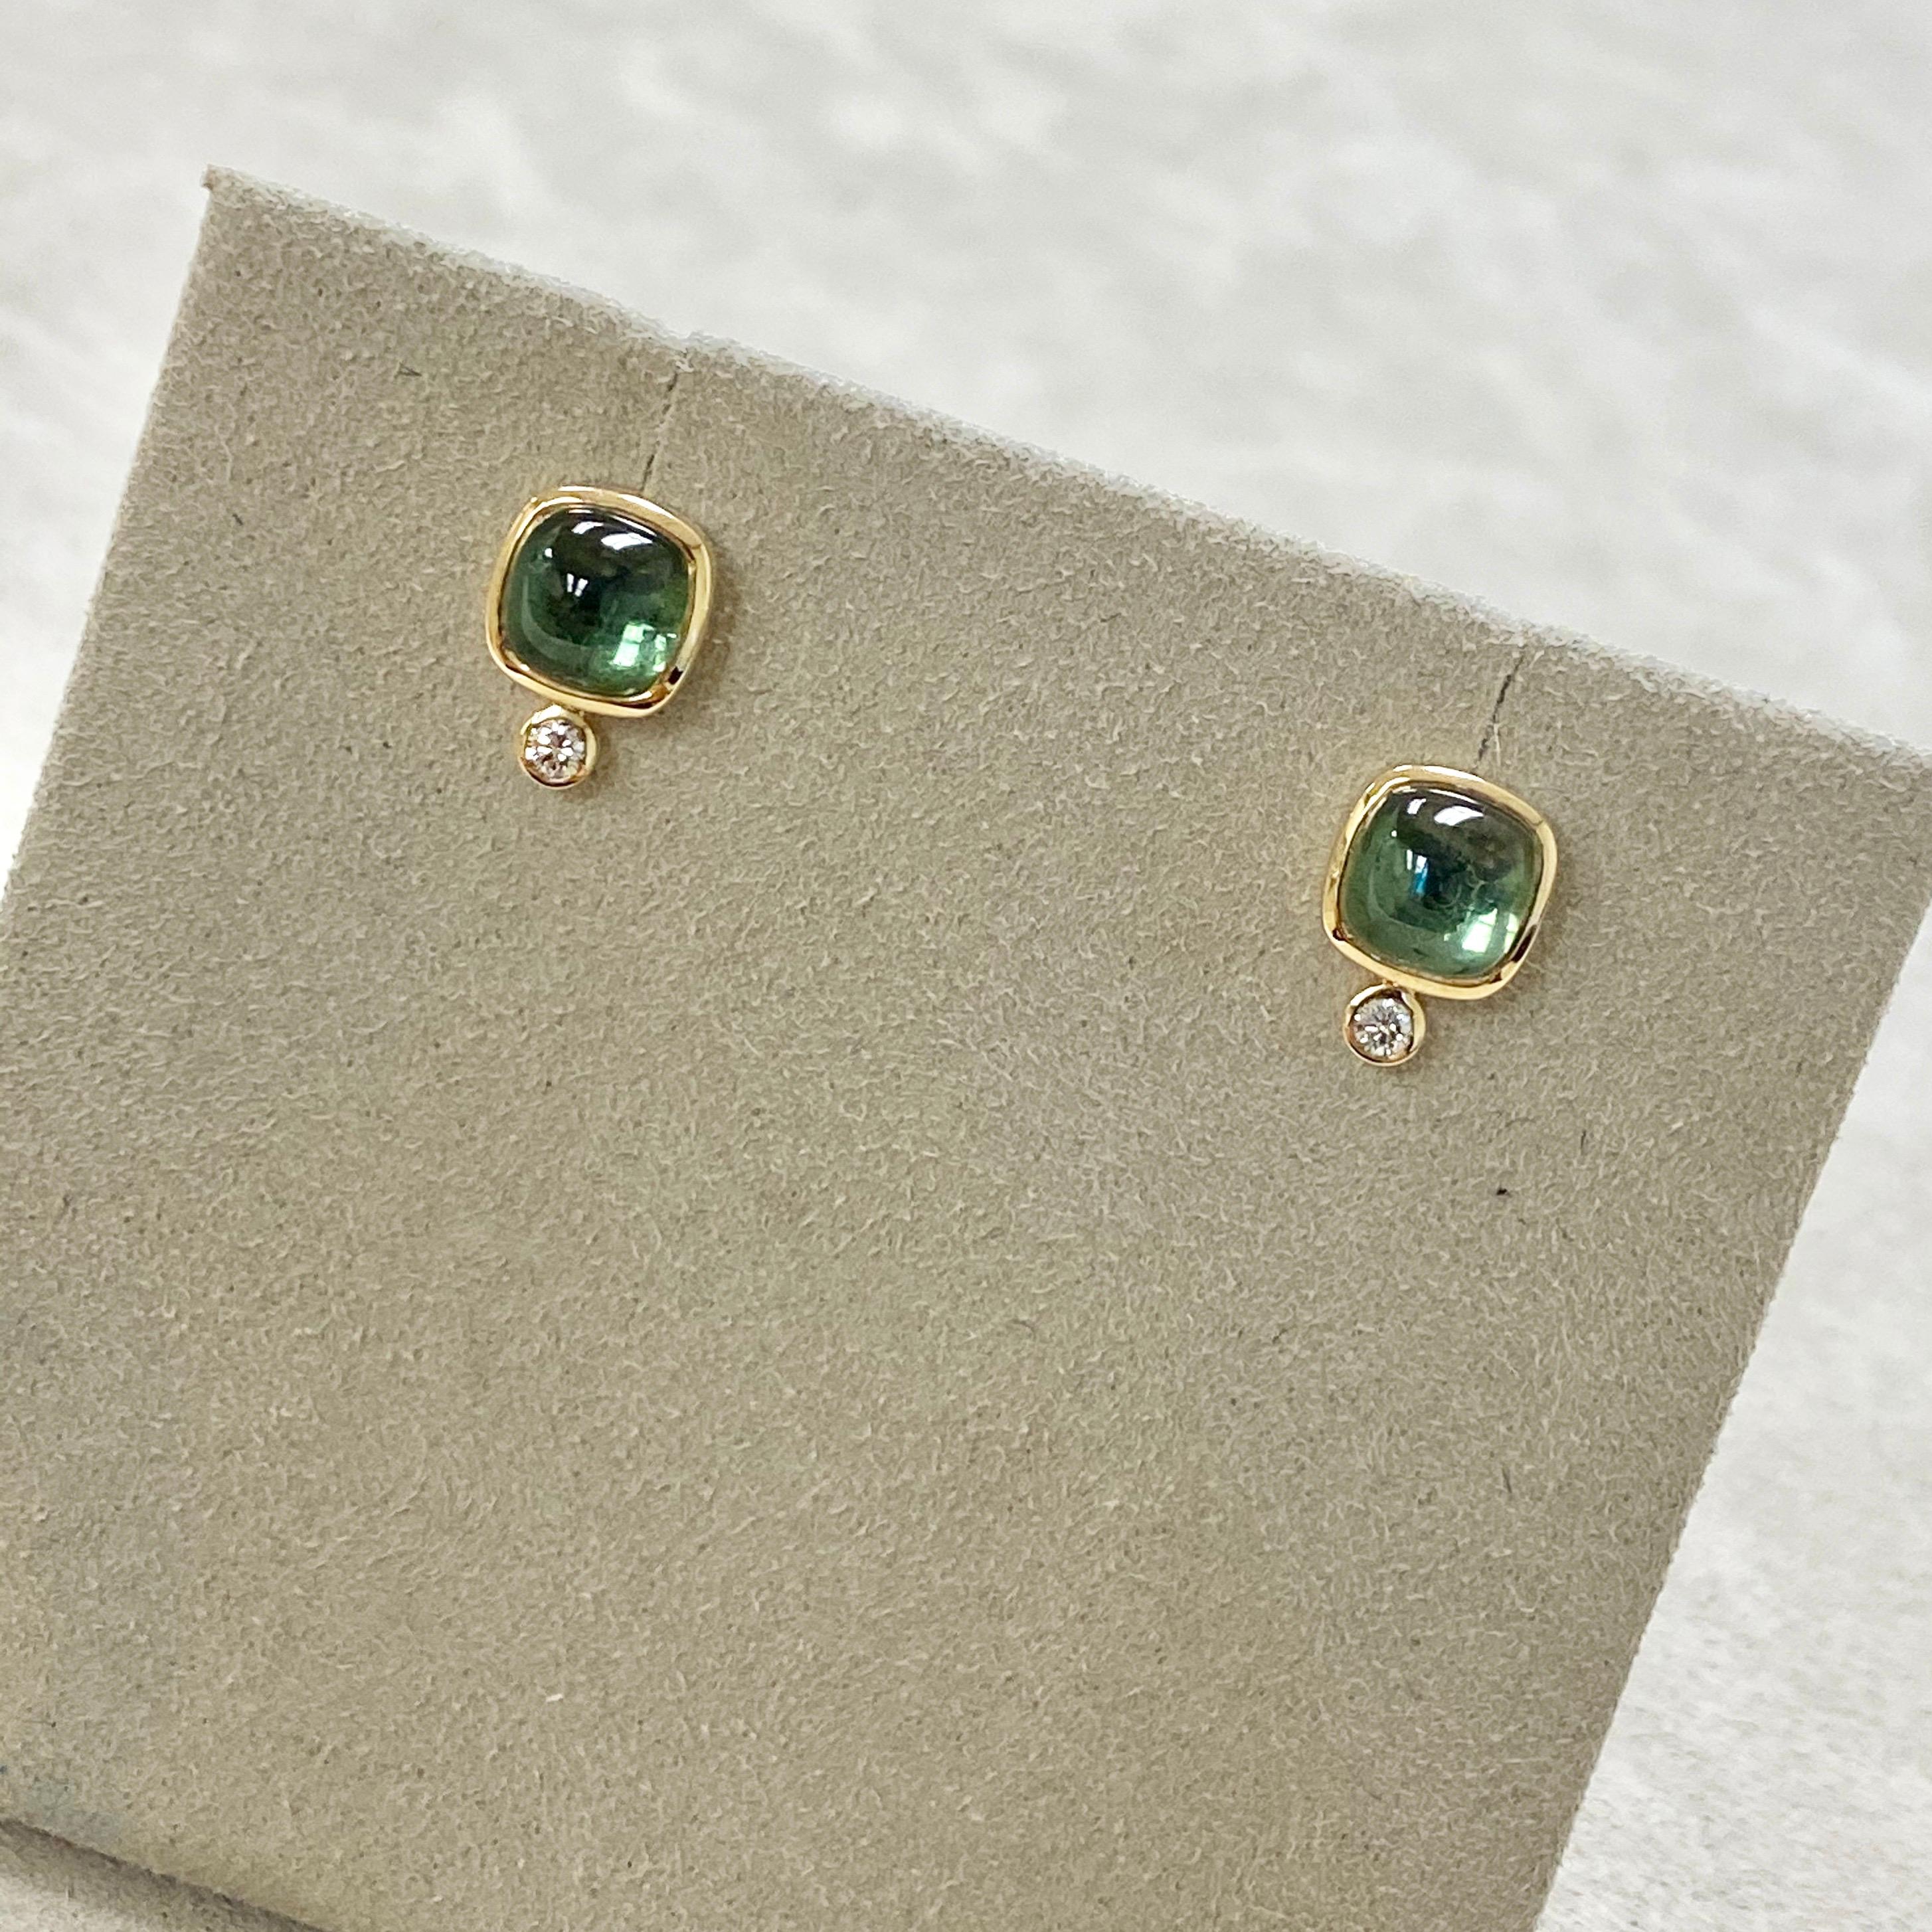 Contemporary Syna Green Tourmaline Yellow Gold Sugarloaf Earrings with Diamonds